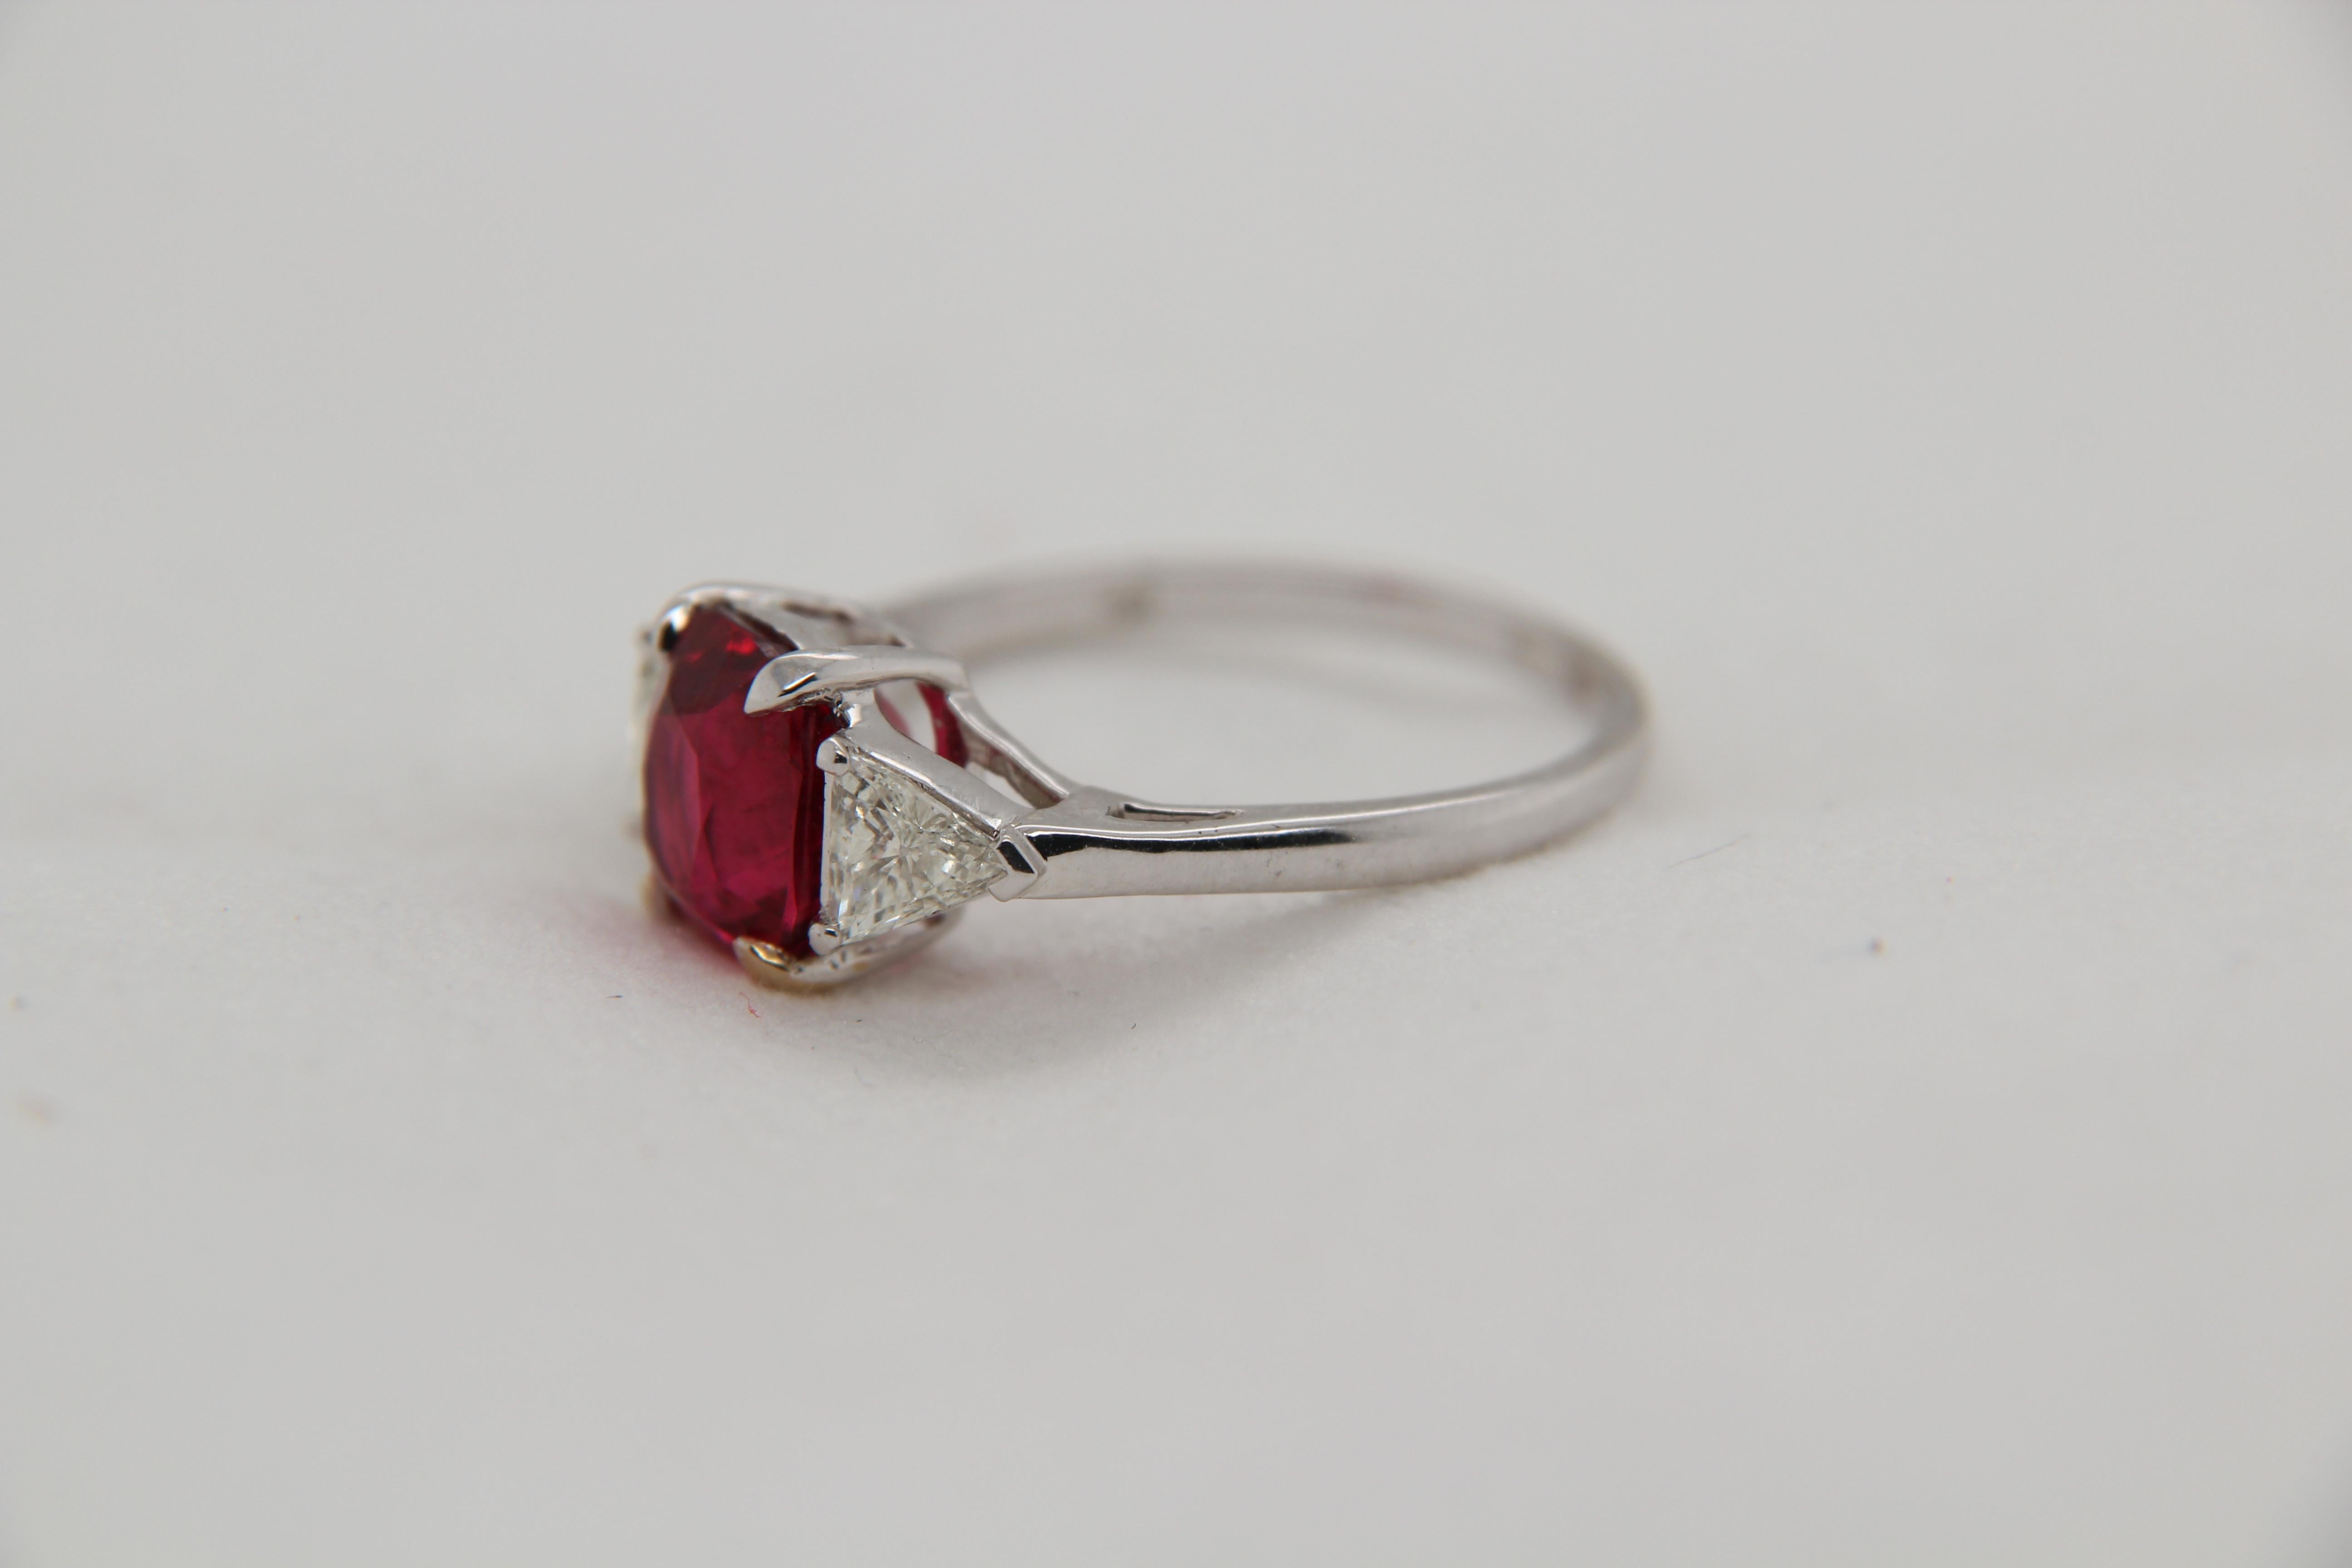 A new 3.04 carat Burmese spinel ring mounted with diamonds in 18 Karat gold. The spinel weighs 3.04 carat and is certified by Gem Research Swisslab (GRS) as natural, no heat, and 'Vivid Red'. The total diamond weight is 0.42 carat and the total